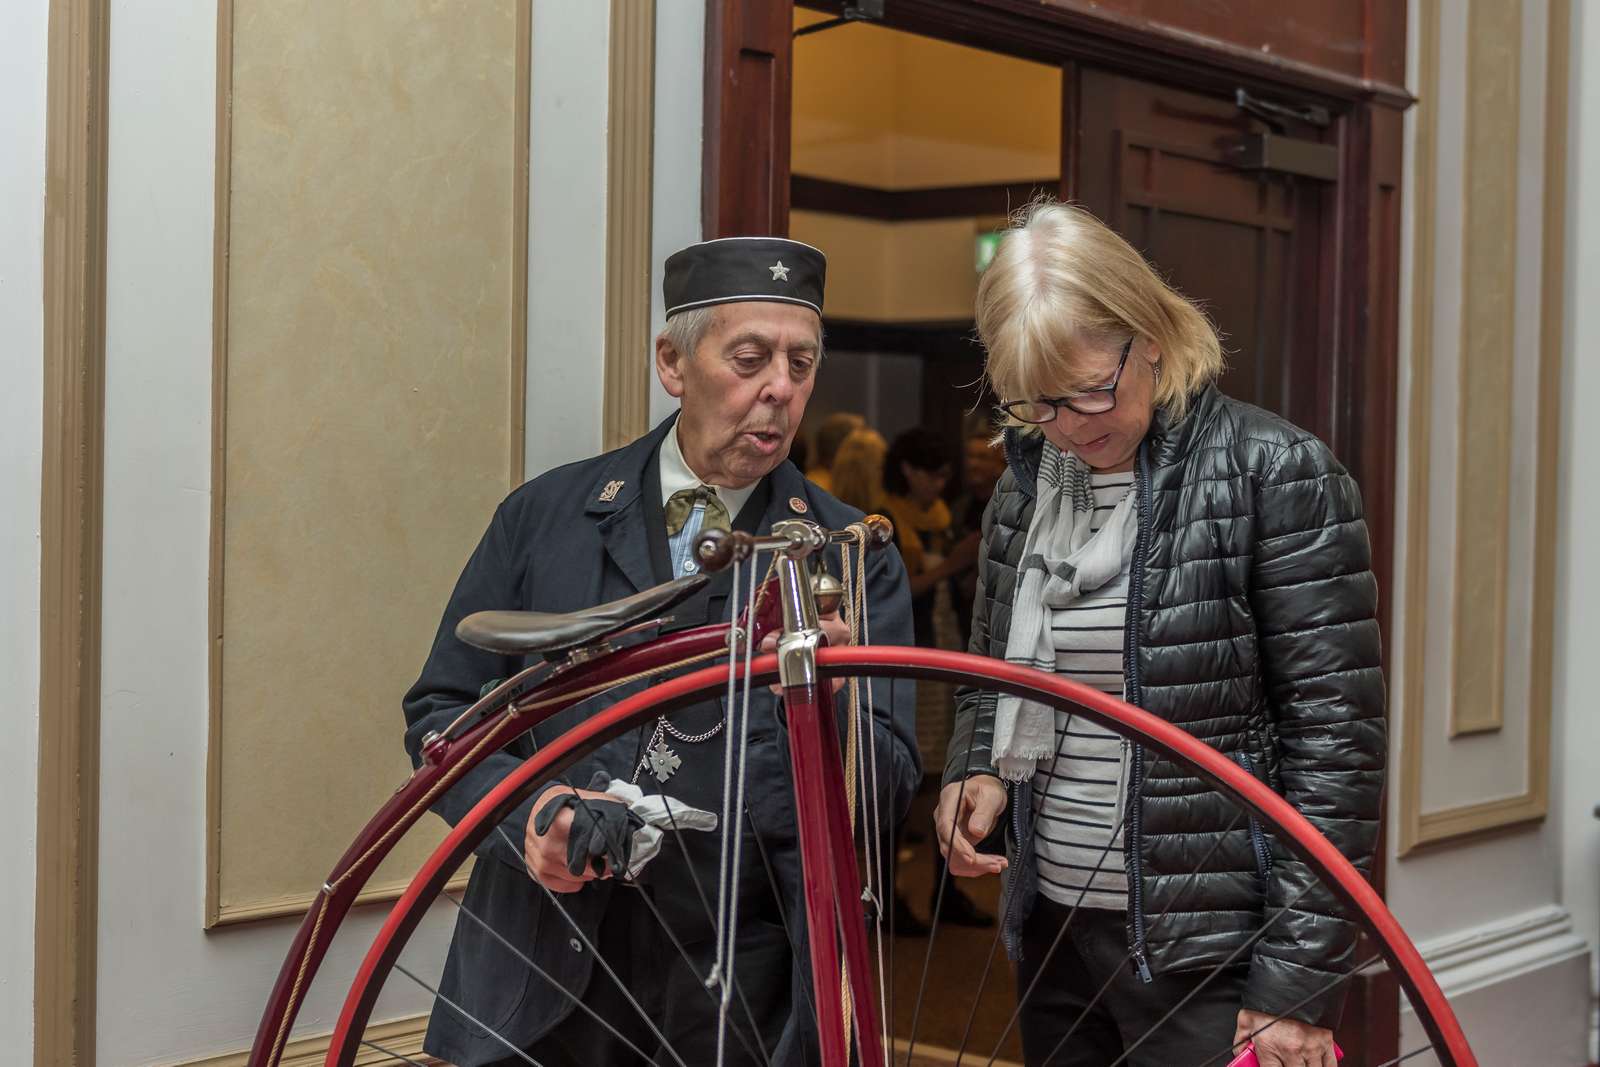 Bygone Bykes cycling club show their vintage bikes